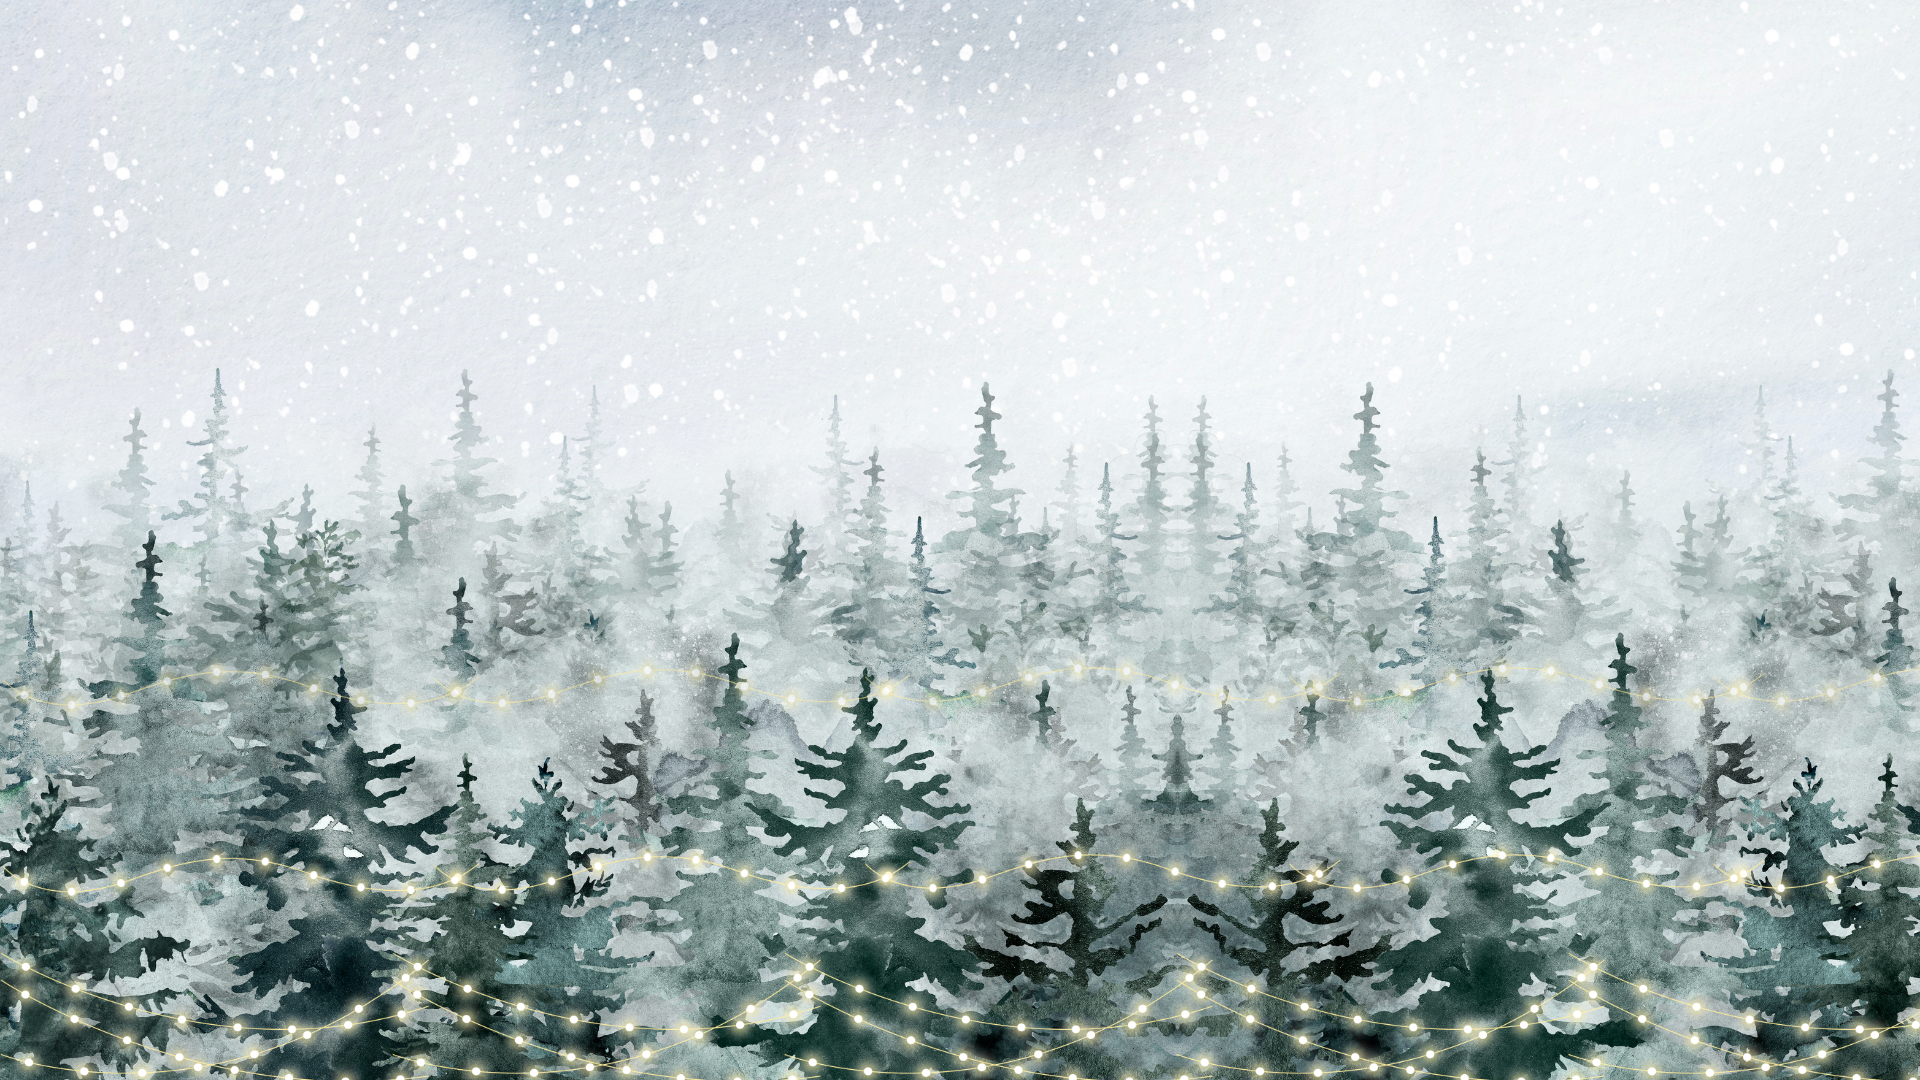 Cute Christmas Wallpaper Aesthetic Backgrounds for Desktop (FREE DOWNLOAD); here are 25 desktop backgrounds you can use FOR FREE! Holiday tech backgrounds!